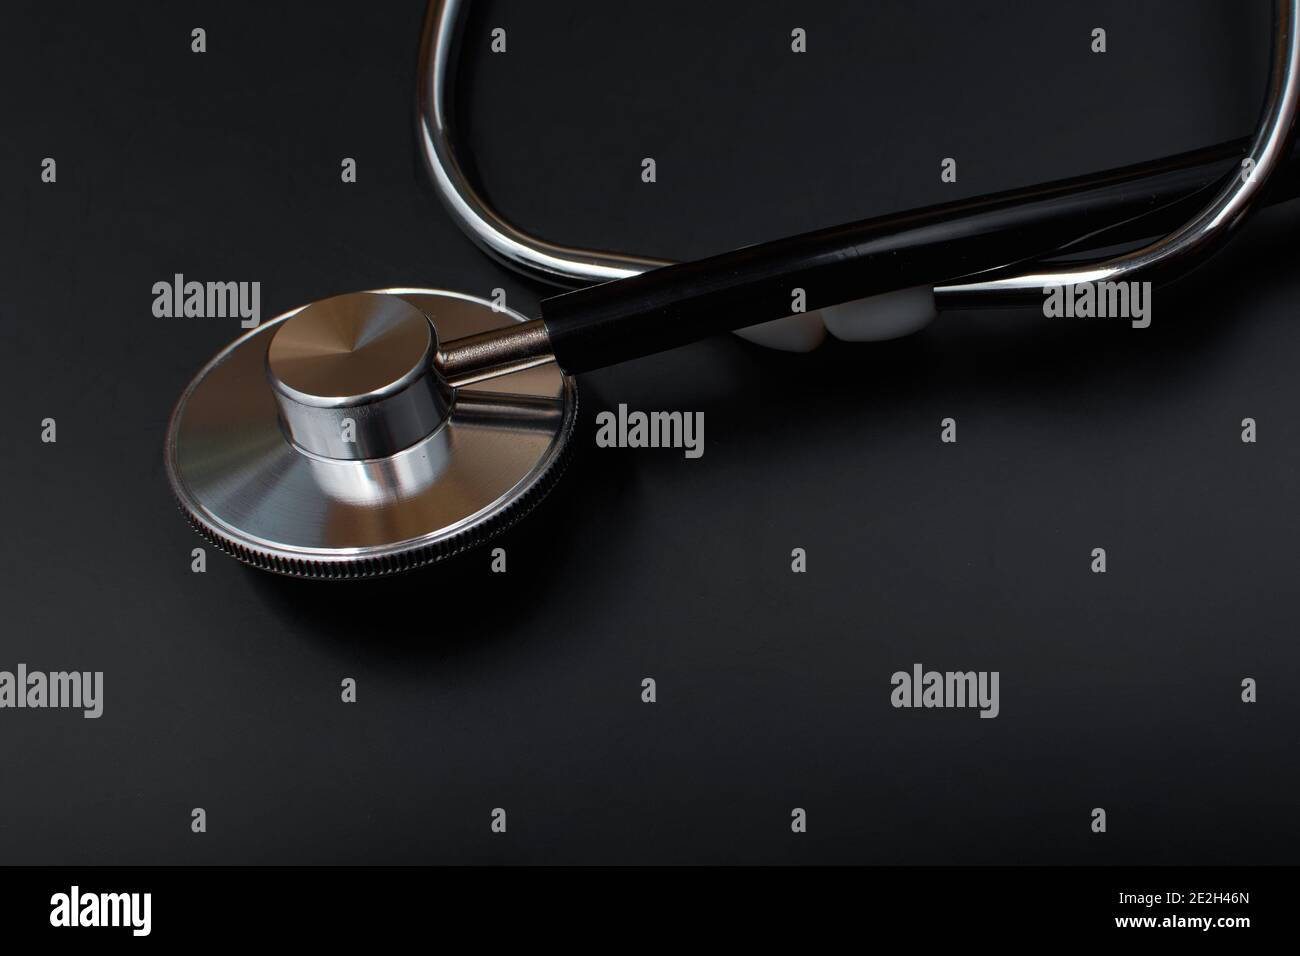 Stethoscope with black rubber tube, over black background. Medical instrument for therapist and cardiologist. A device for listening to heart and puls Stock Photo